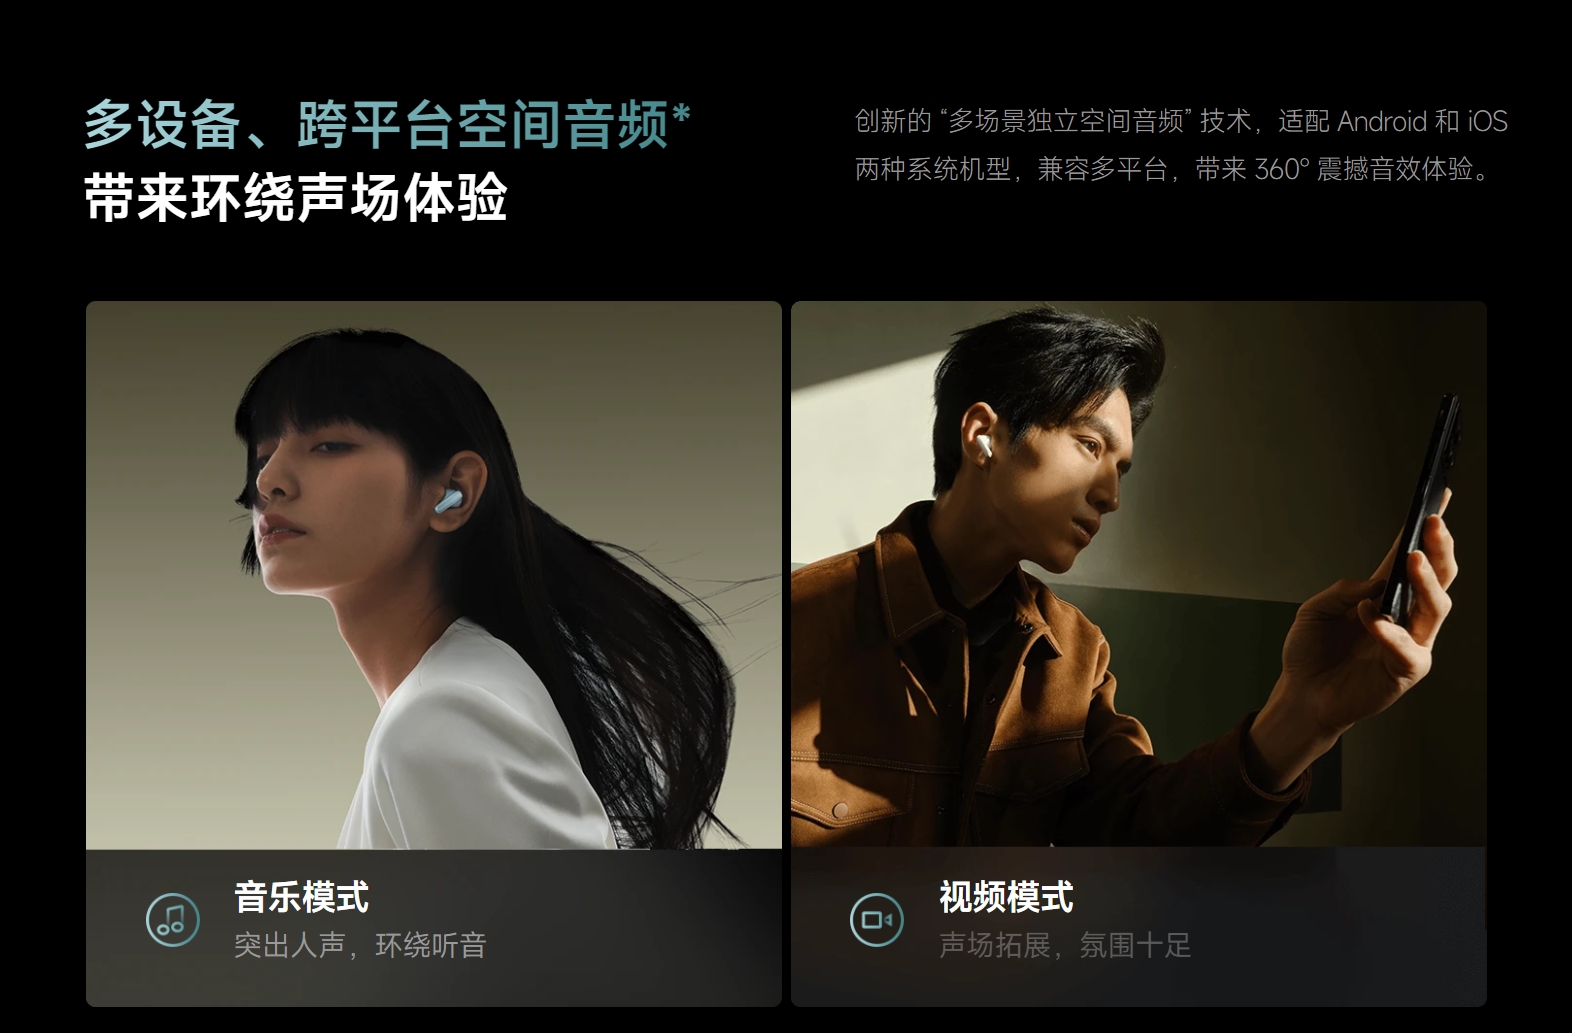 TECHNOLOGY INFO on X: Redmi Buds 5 Pro 1. 10 hours of battery life for a  single earphone 2. 38 hours of battery life for the whole machine 3. 5  minutes of